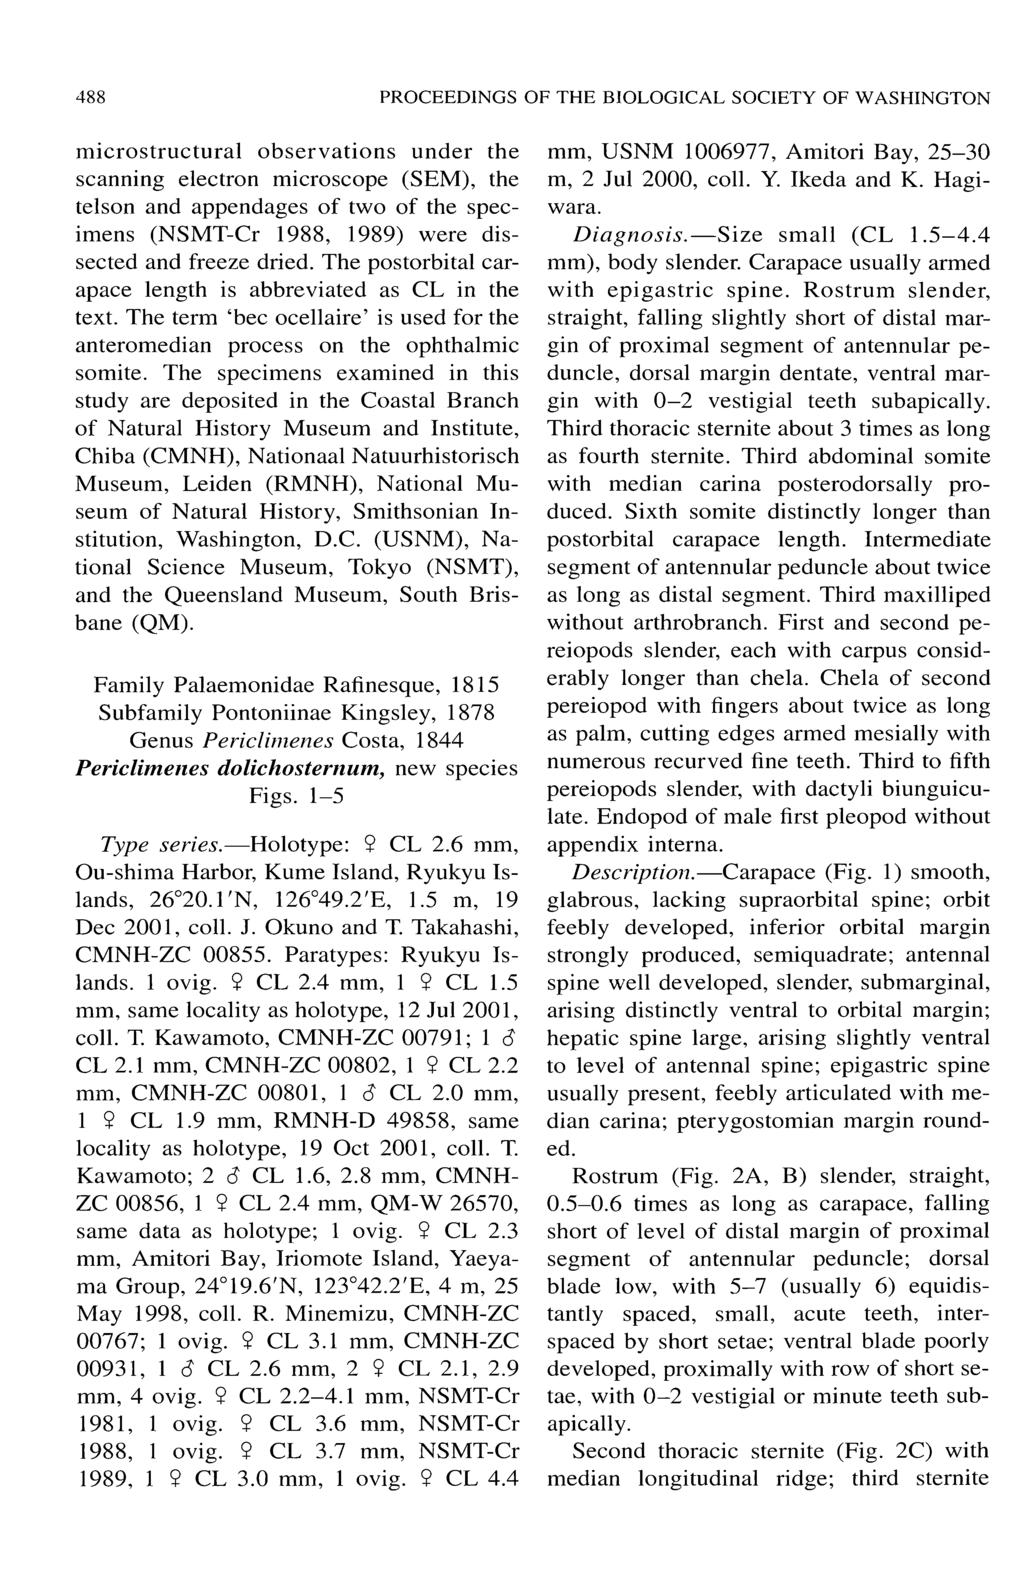 488 PROCEEDINGS OF THE BIOLOGICAL SOCIETY OF WASHINGTON microstructural observations under the scanning electron microscope (SEM), the telson and appendages of two of the specimens (NSMT-Cr 1988,